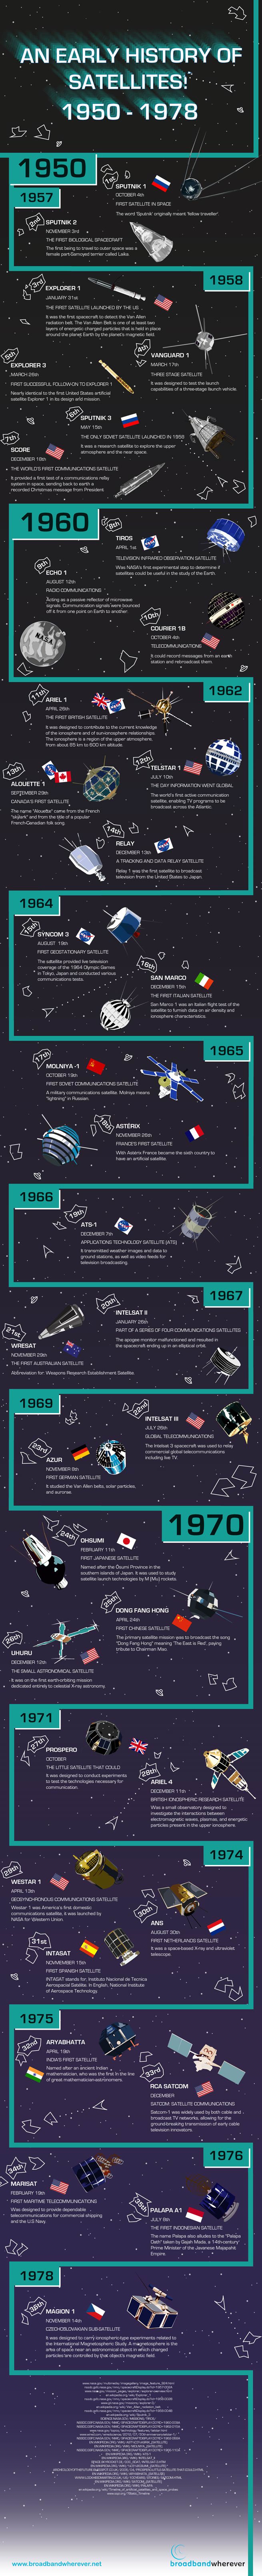 Early History of Satellites